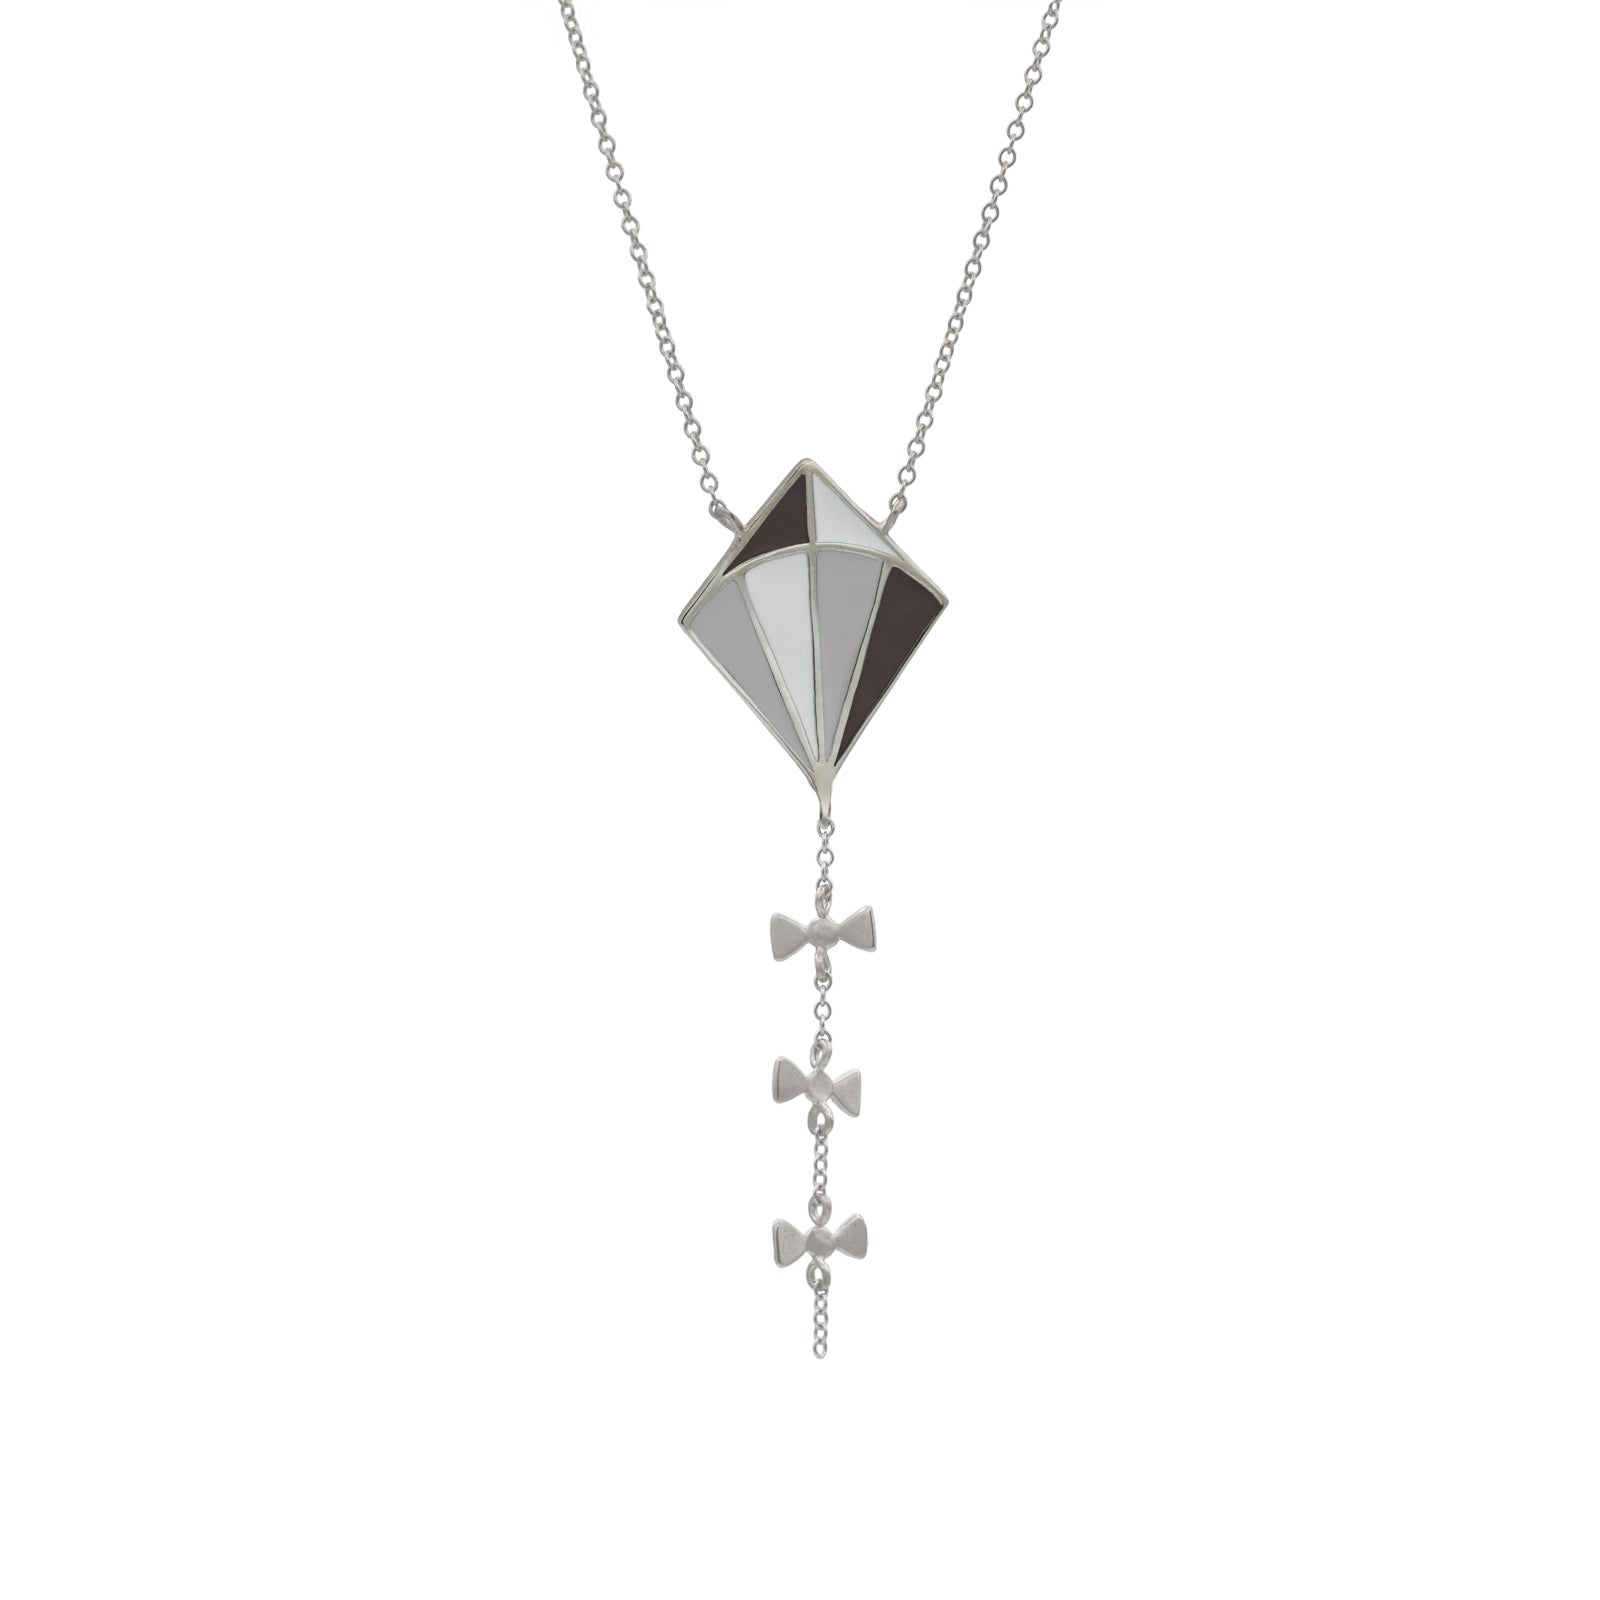 silver kite necklace with white, gray and black enamel